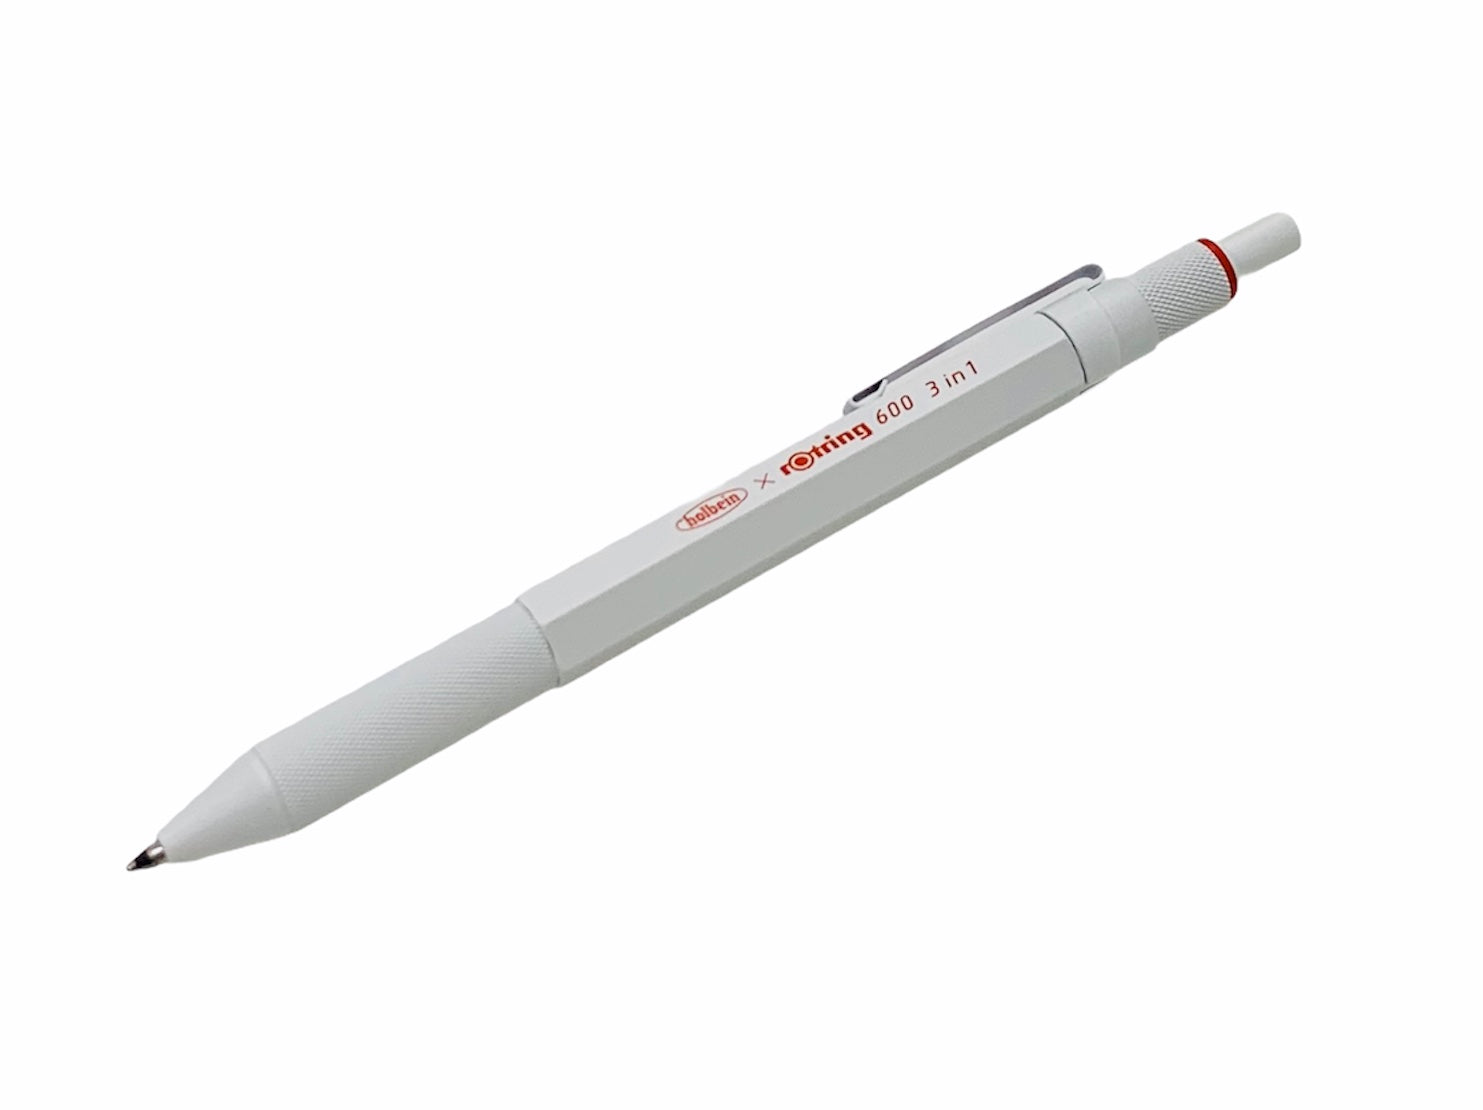 Supreme rOtring 600 3-in-1 Silver - SS23 - US